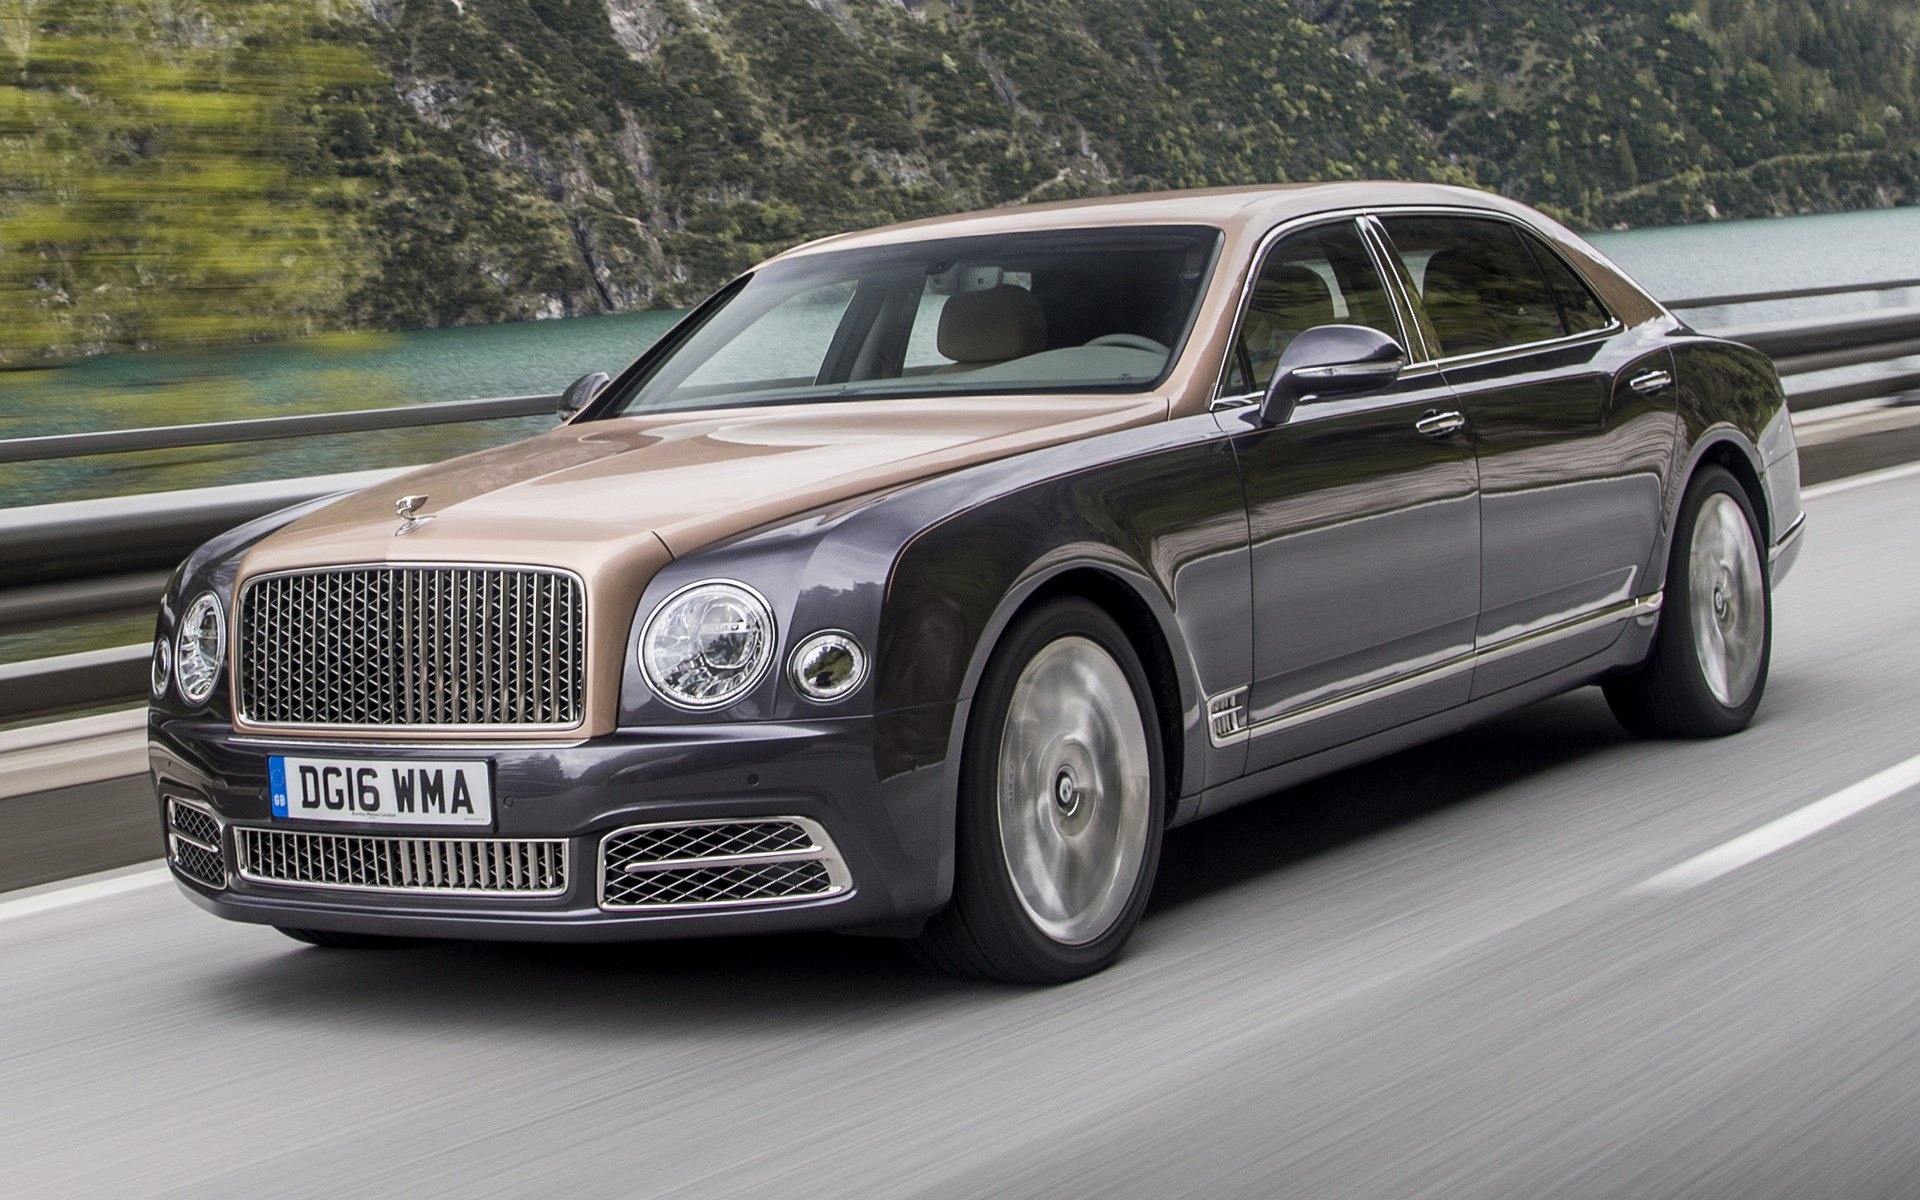 2016 Bentley Mulsanne Extended Wheelbase Wallpapers And Hd Images Car Pixel